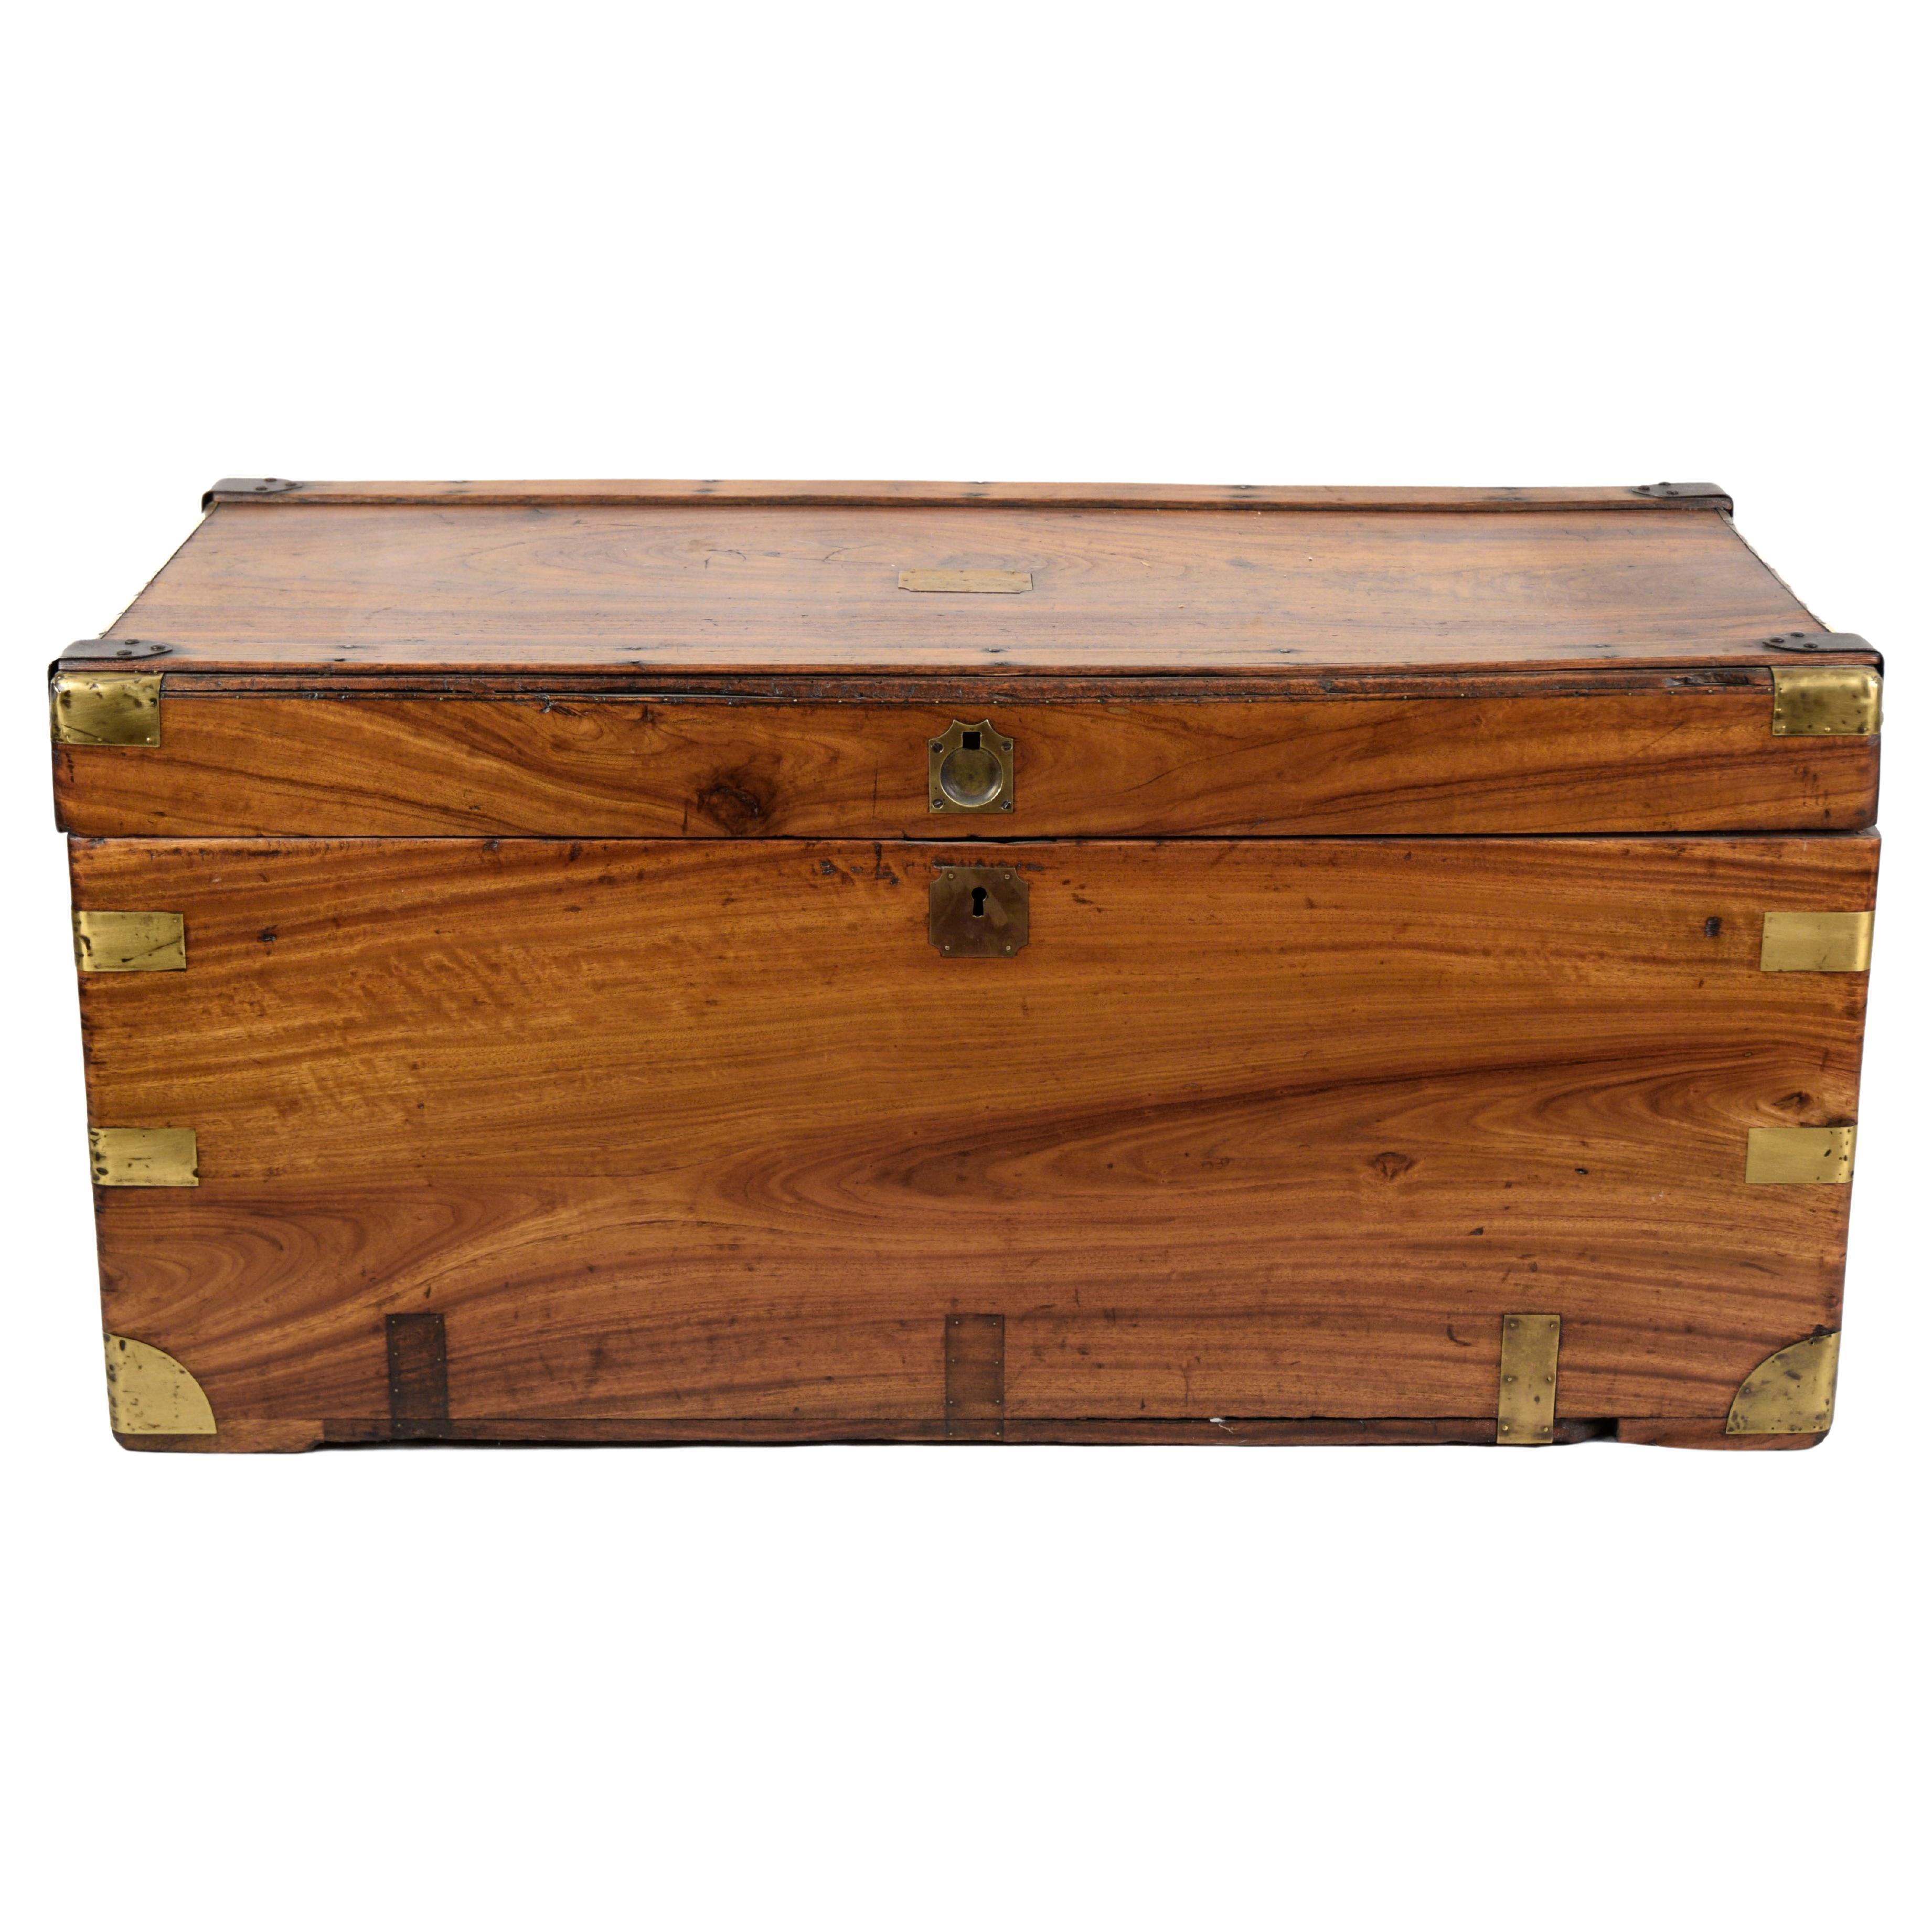 Camphorwood Campaign Chest - Late 19th Century Chinese Export R.B. Van Cleve, NY